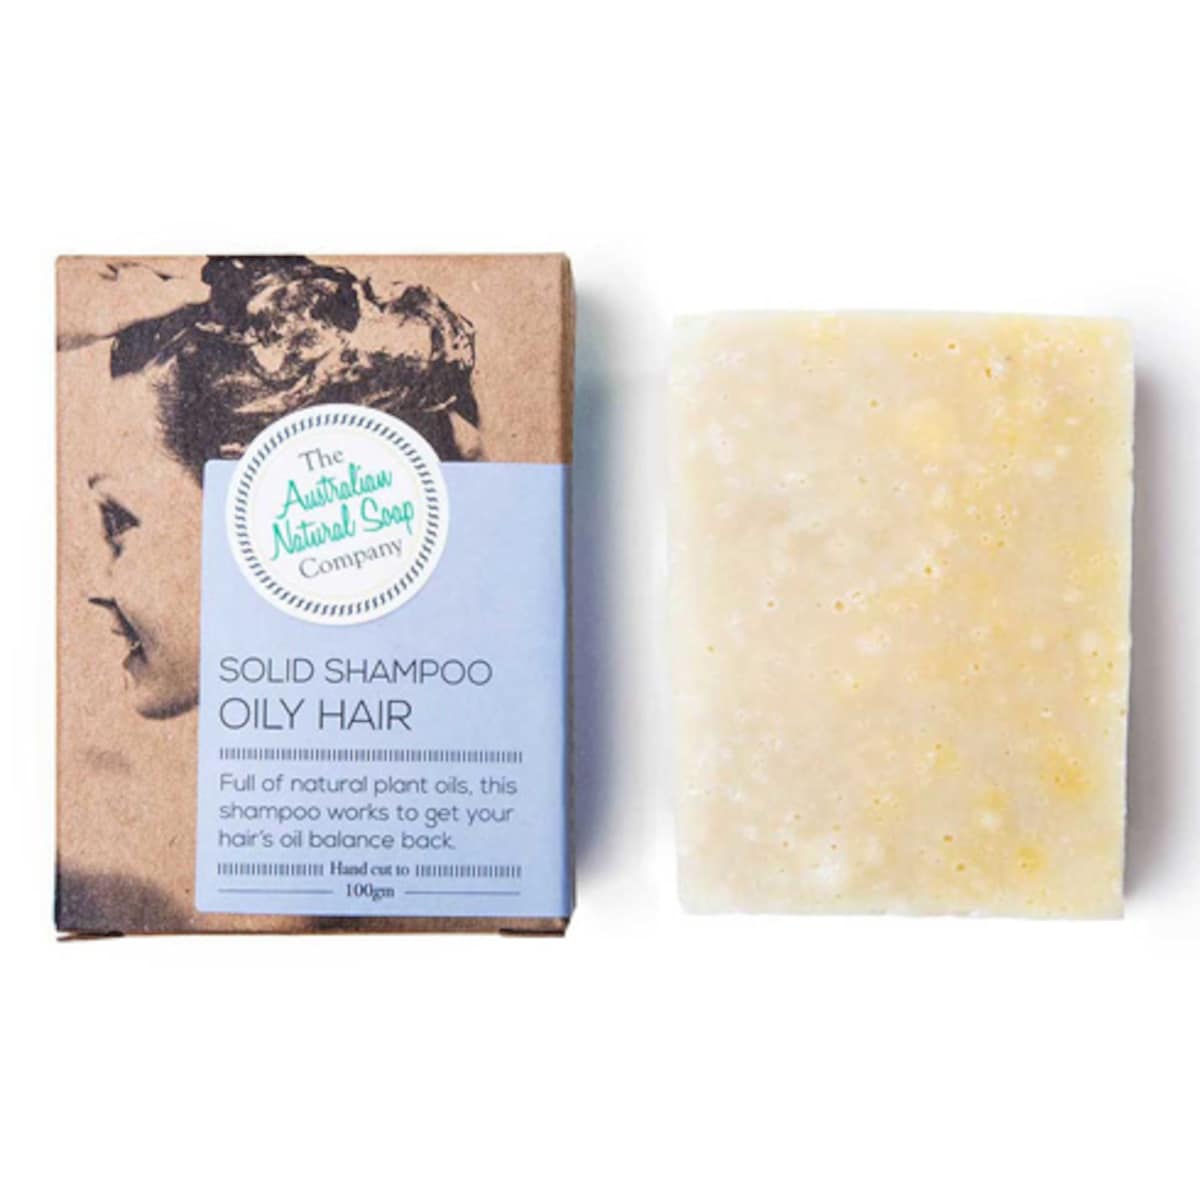 The Australian Natural Soap Company Solid Shampoo for Oily Hair 100g